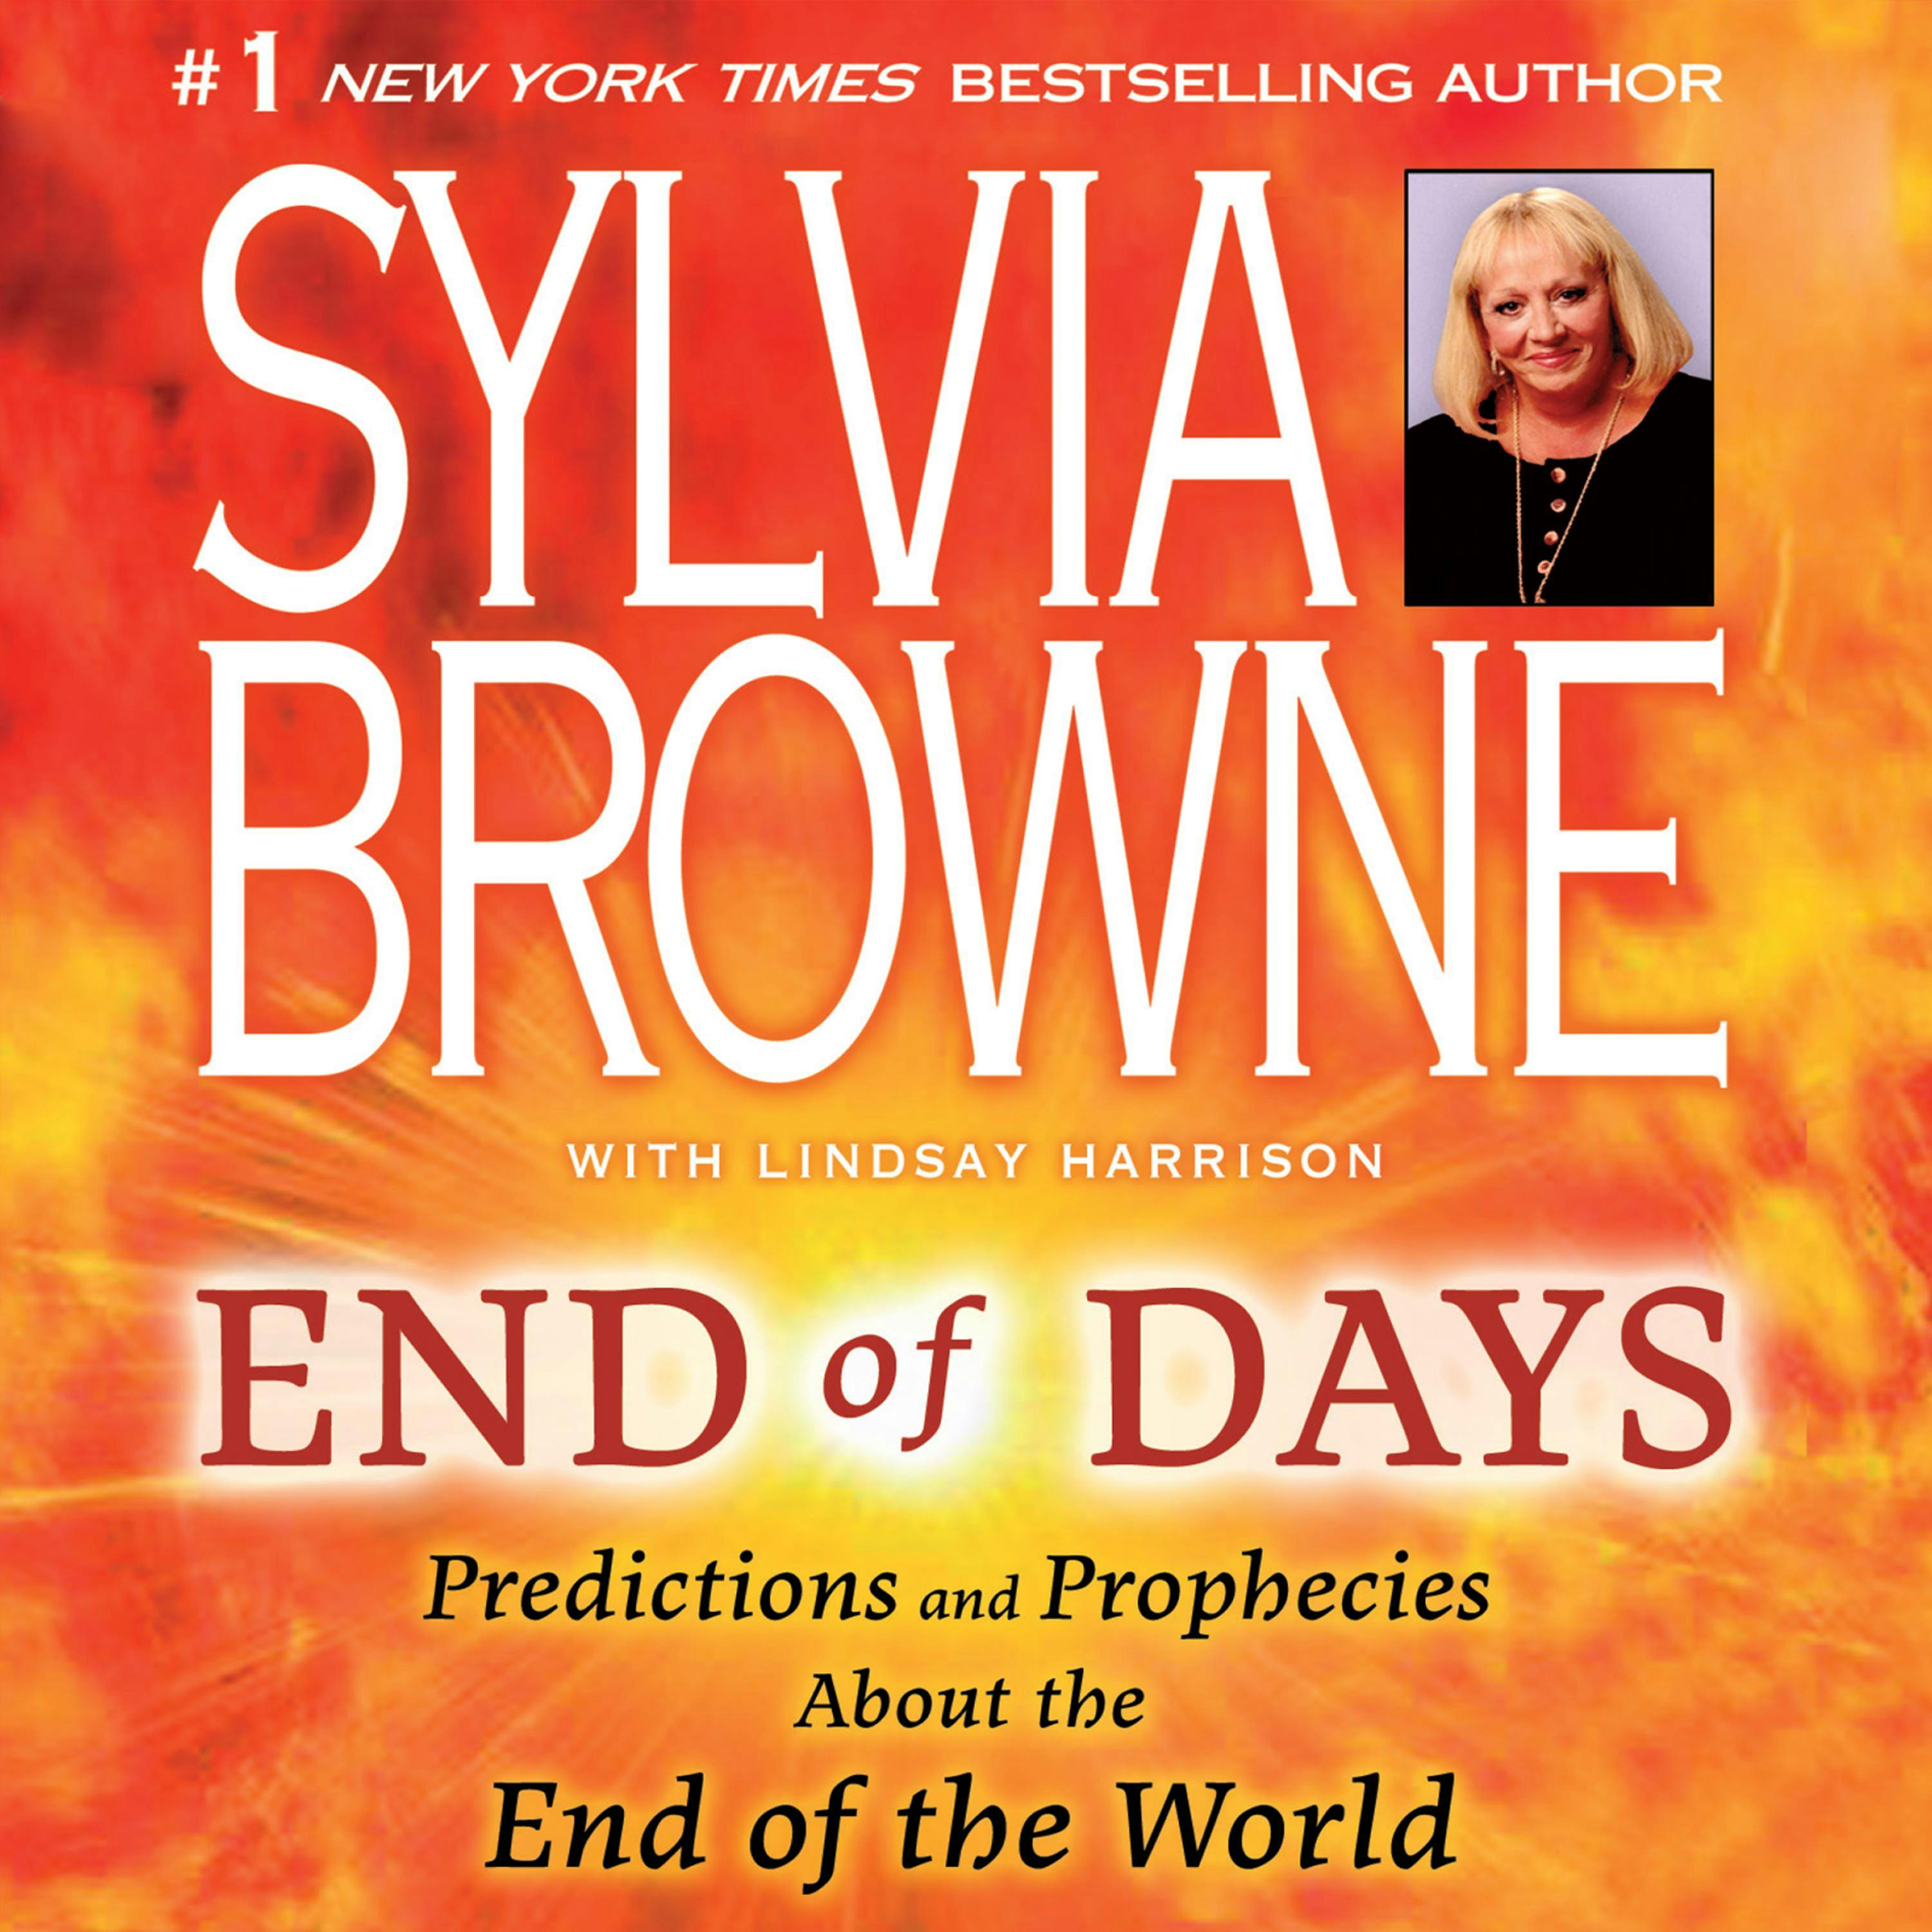 End of Days: Predictions and Prophecies About the End of the World - Lindsay Harrison, Sylvia Browne